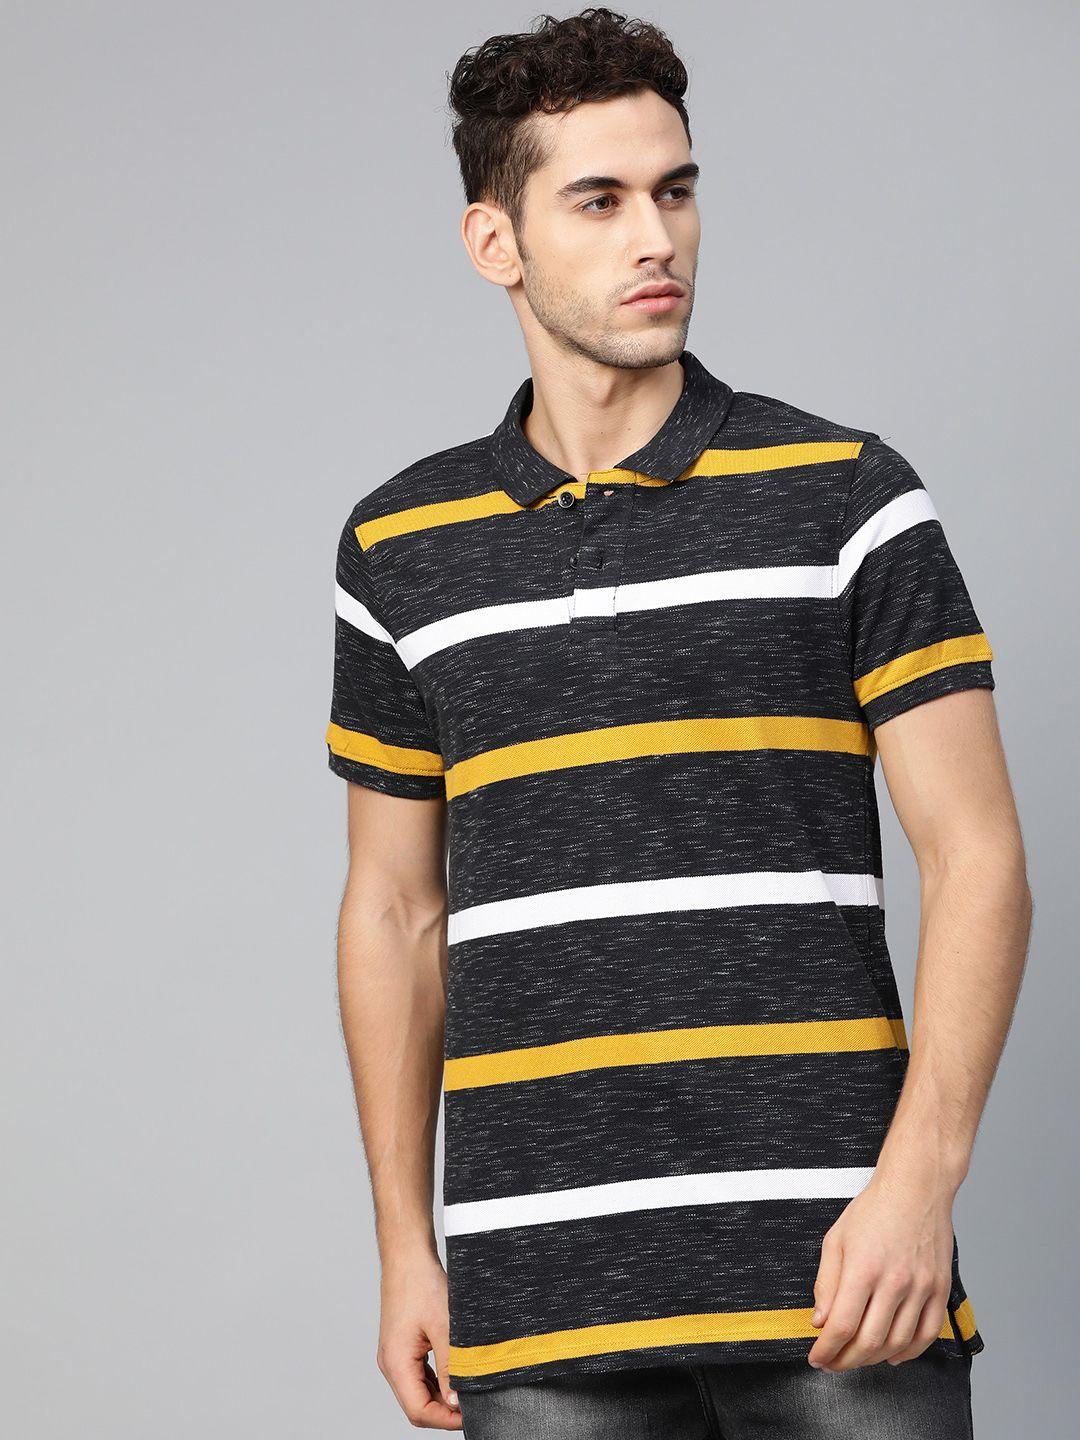 the roadster lifestyle co men charcoal grey  mustard yellow striped polo collar pure cotton t-shirt